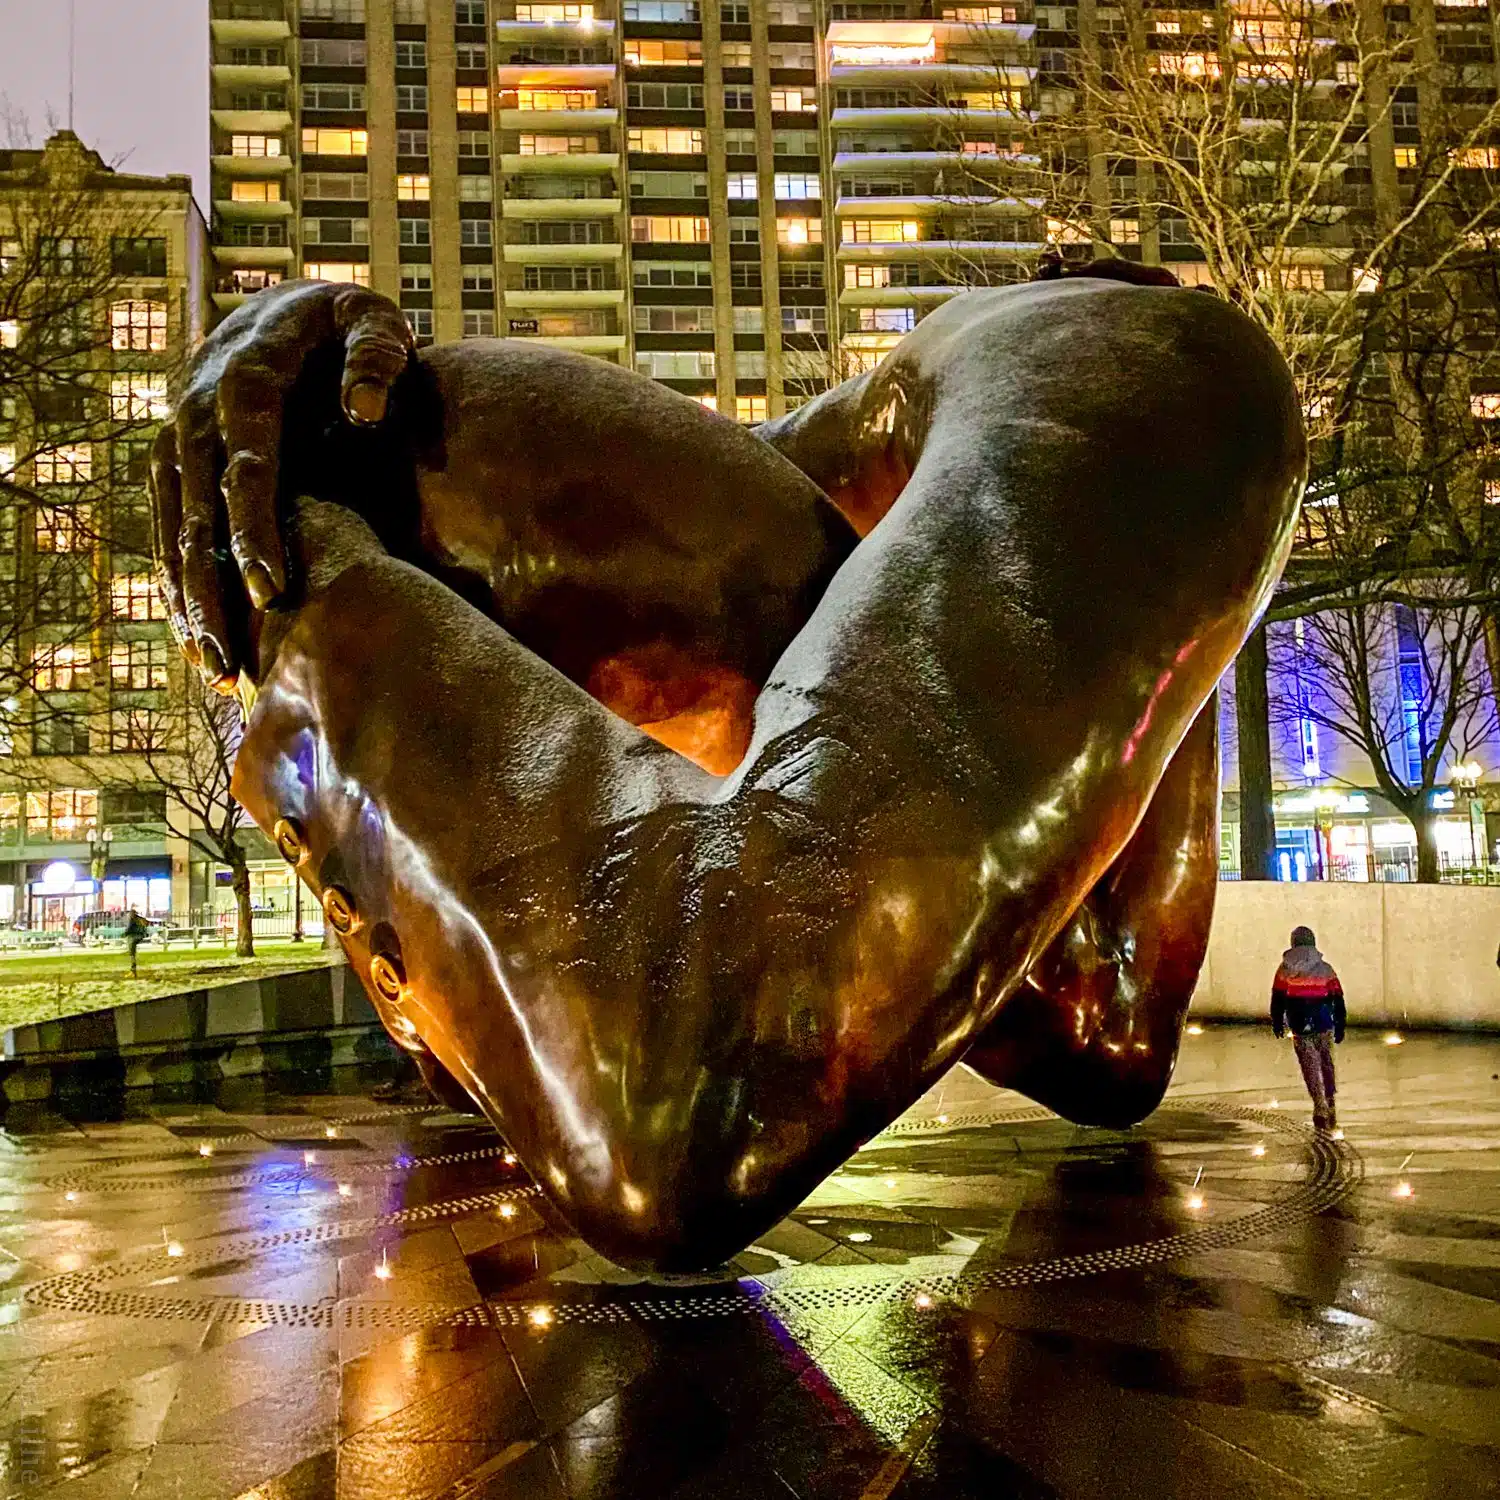 Boston's Embrace sculpture is a heart at certain angles.